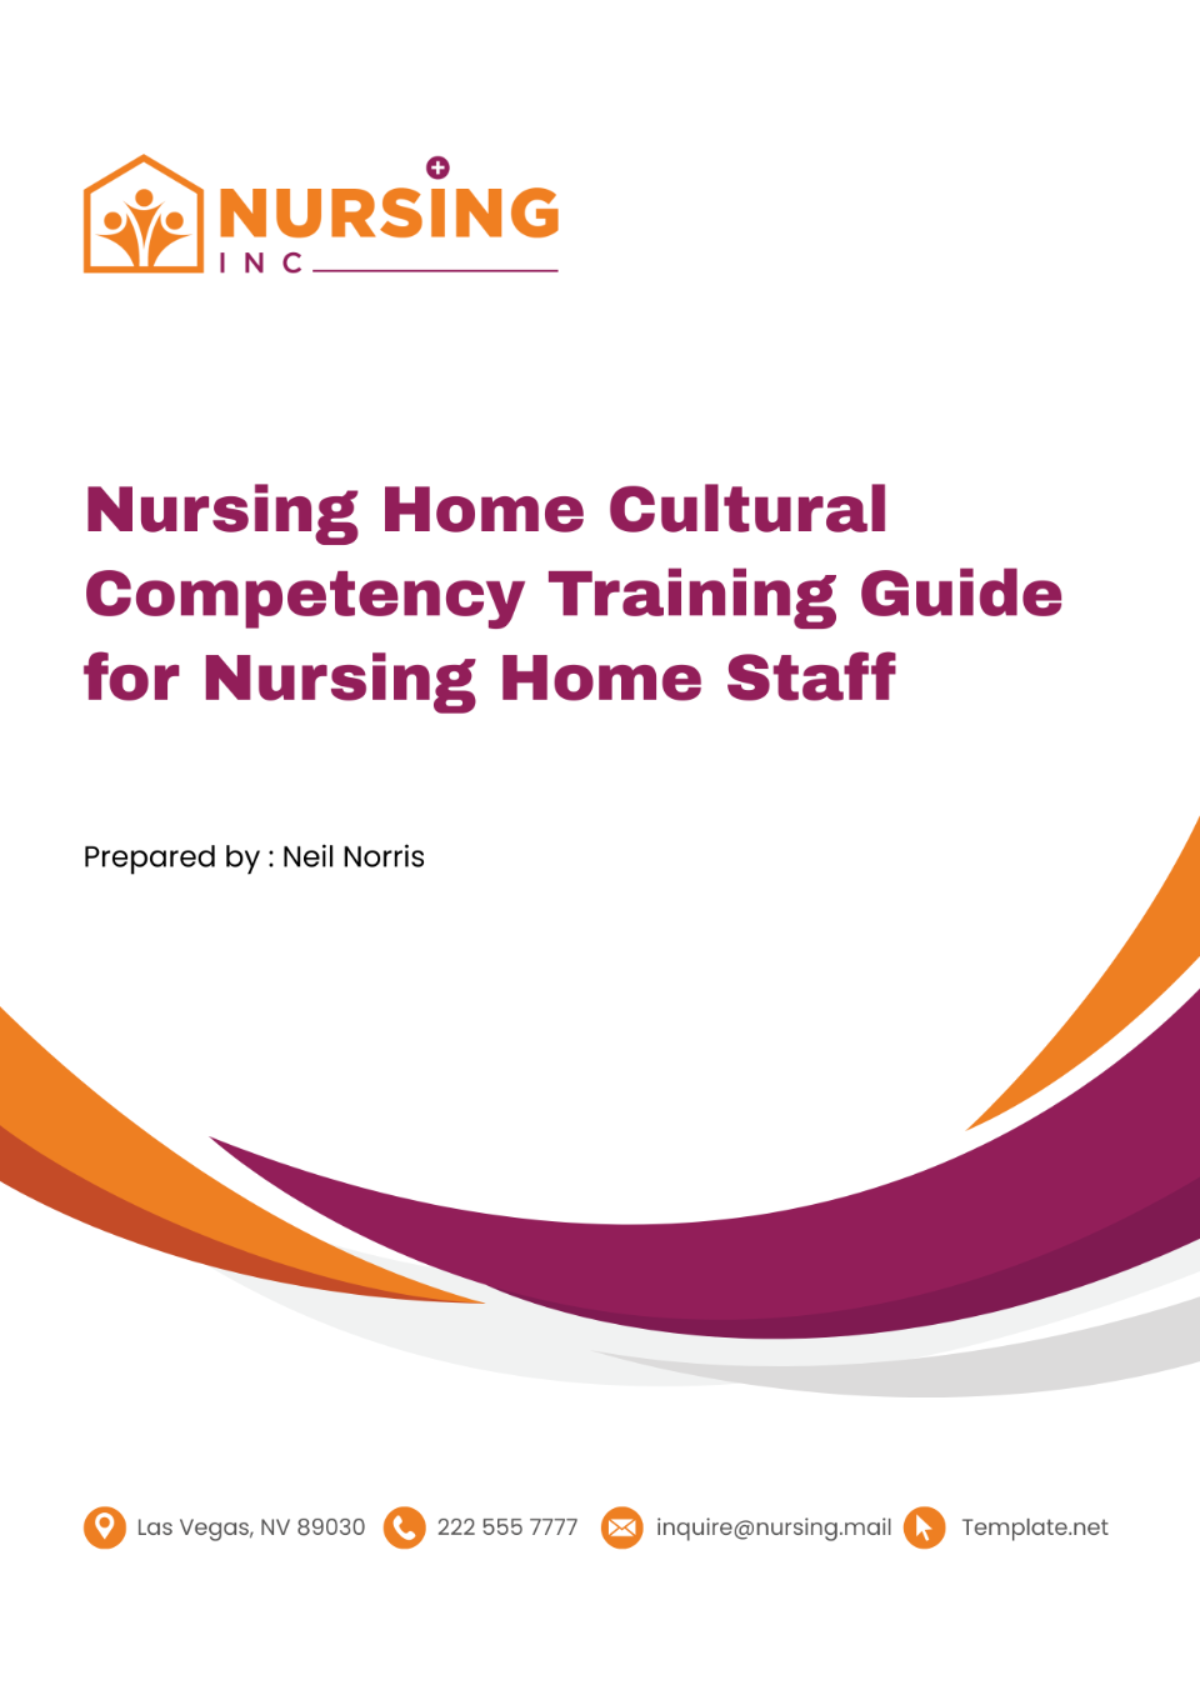 Free Nursing Home Cultural Competency Training Guide for Nursing Home Staff Template